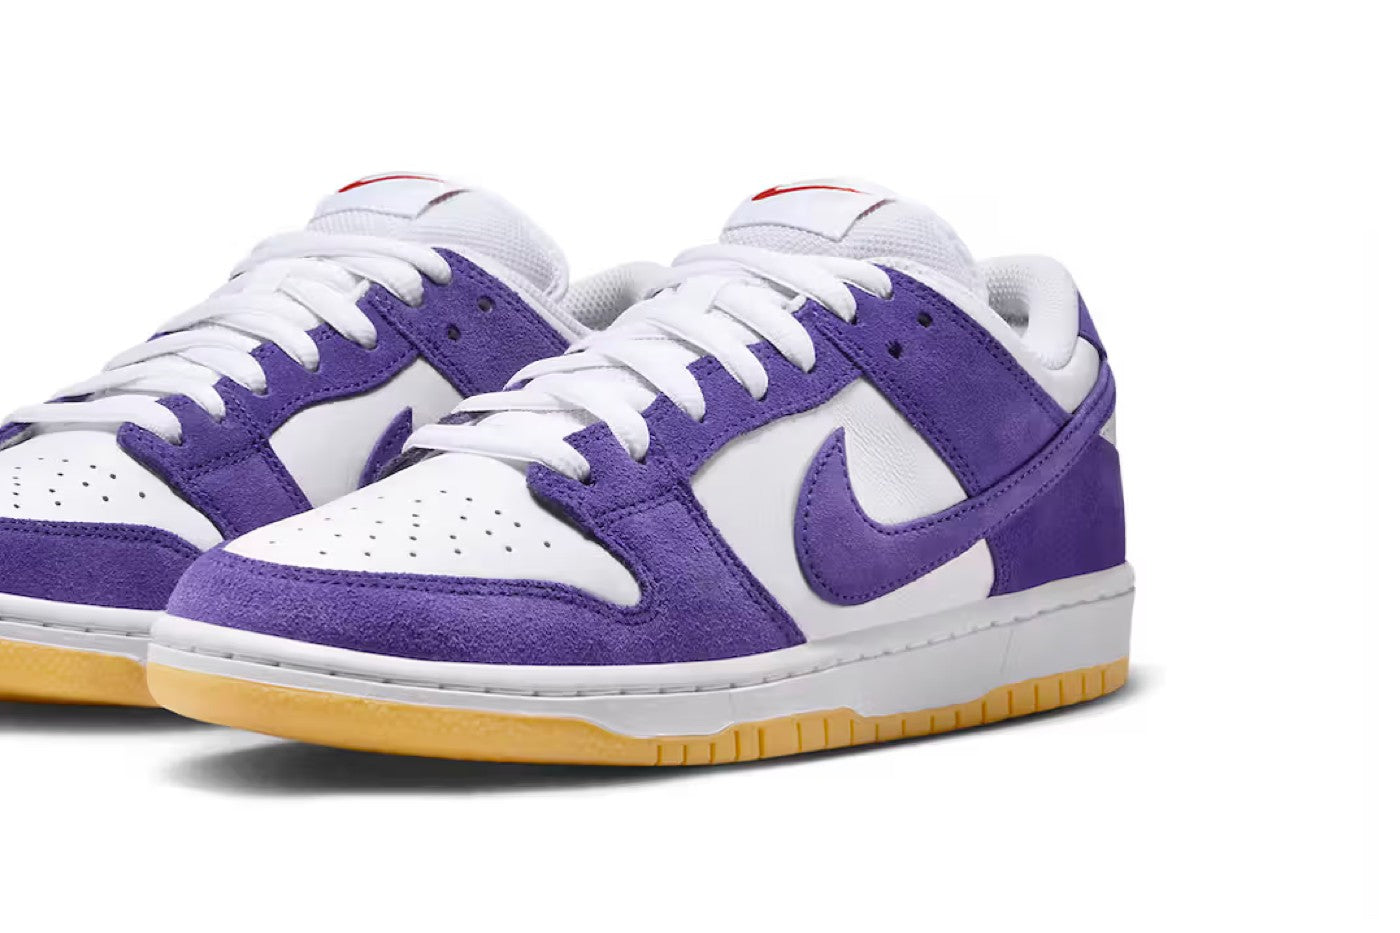 The Nike SB Dunk Low "Court Purple" is Coming Soon